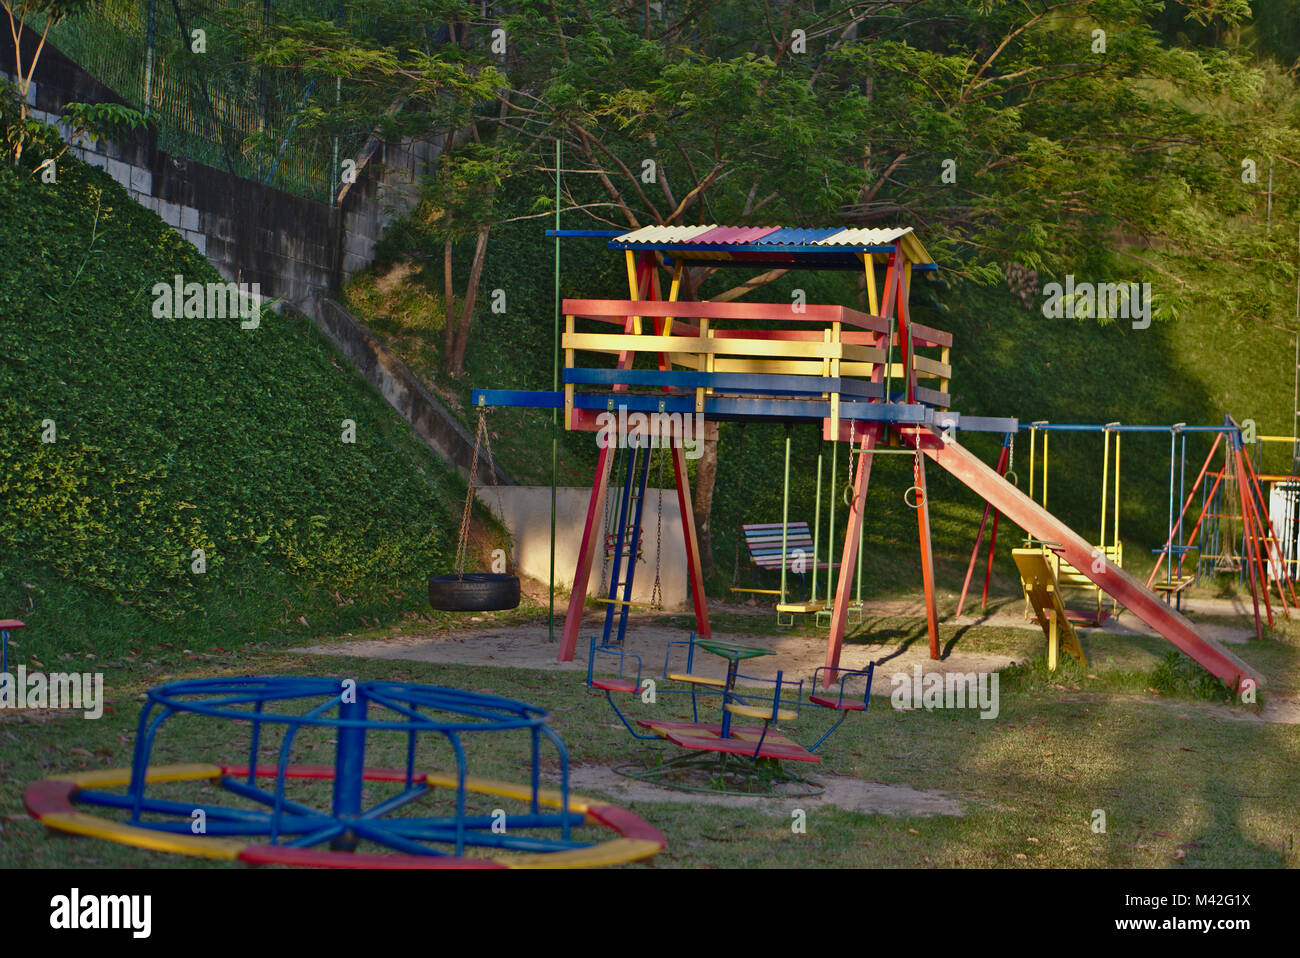 Colorful playground wood house and a colorful roundabout at a playground. Stock Photo